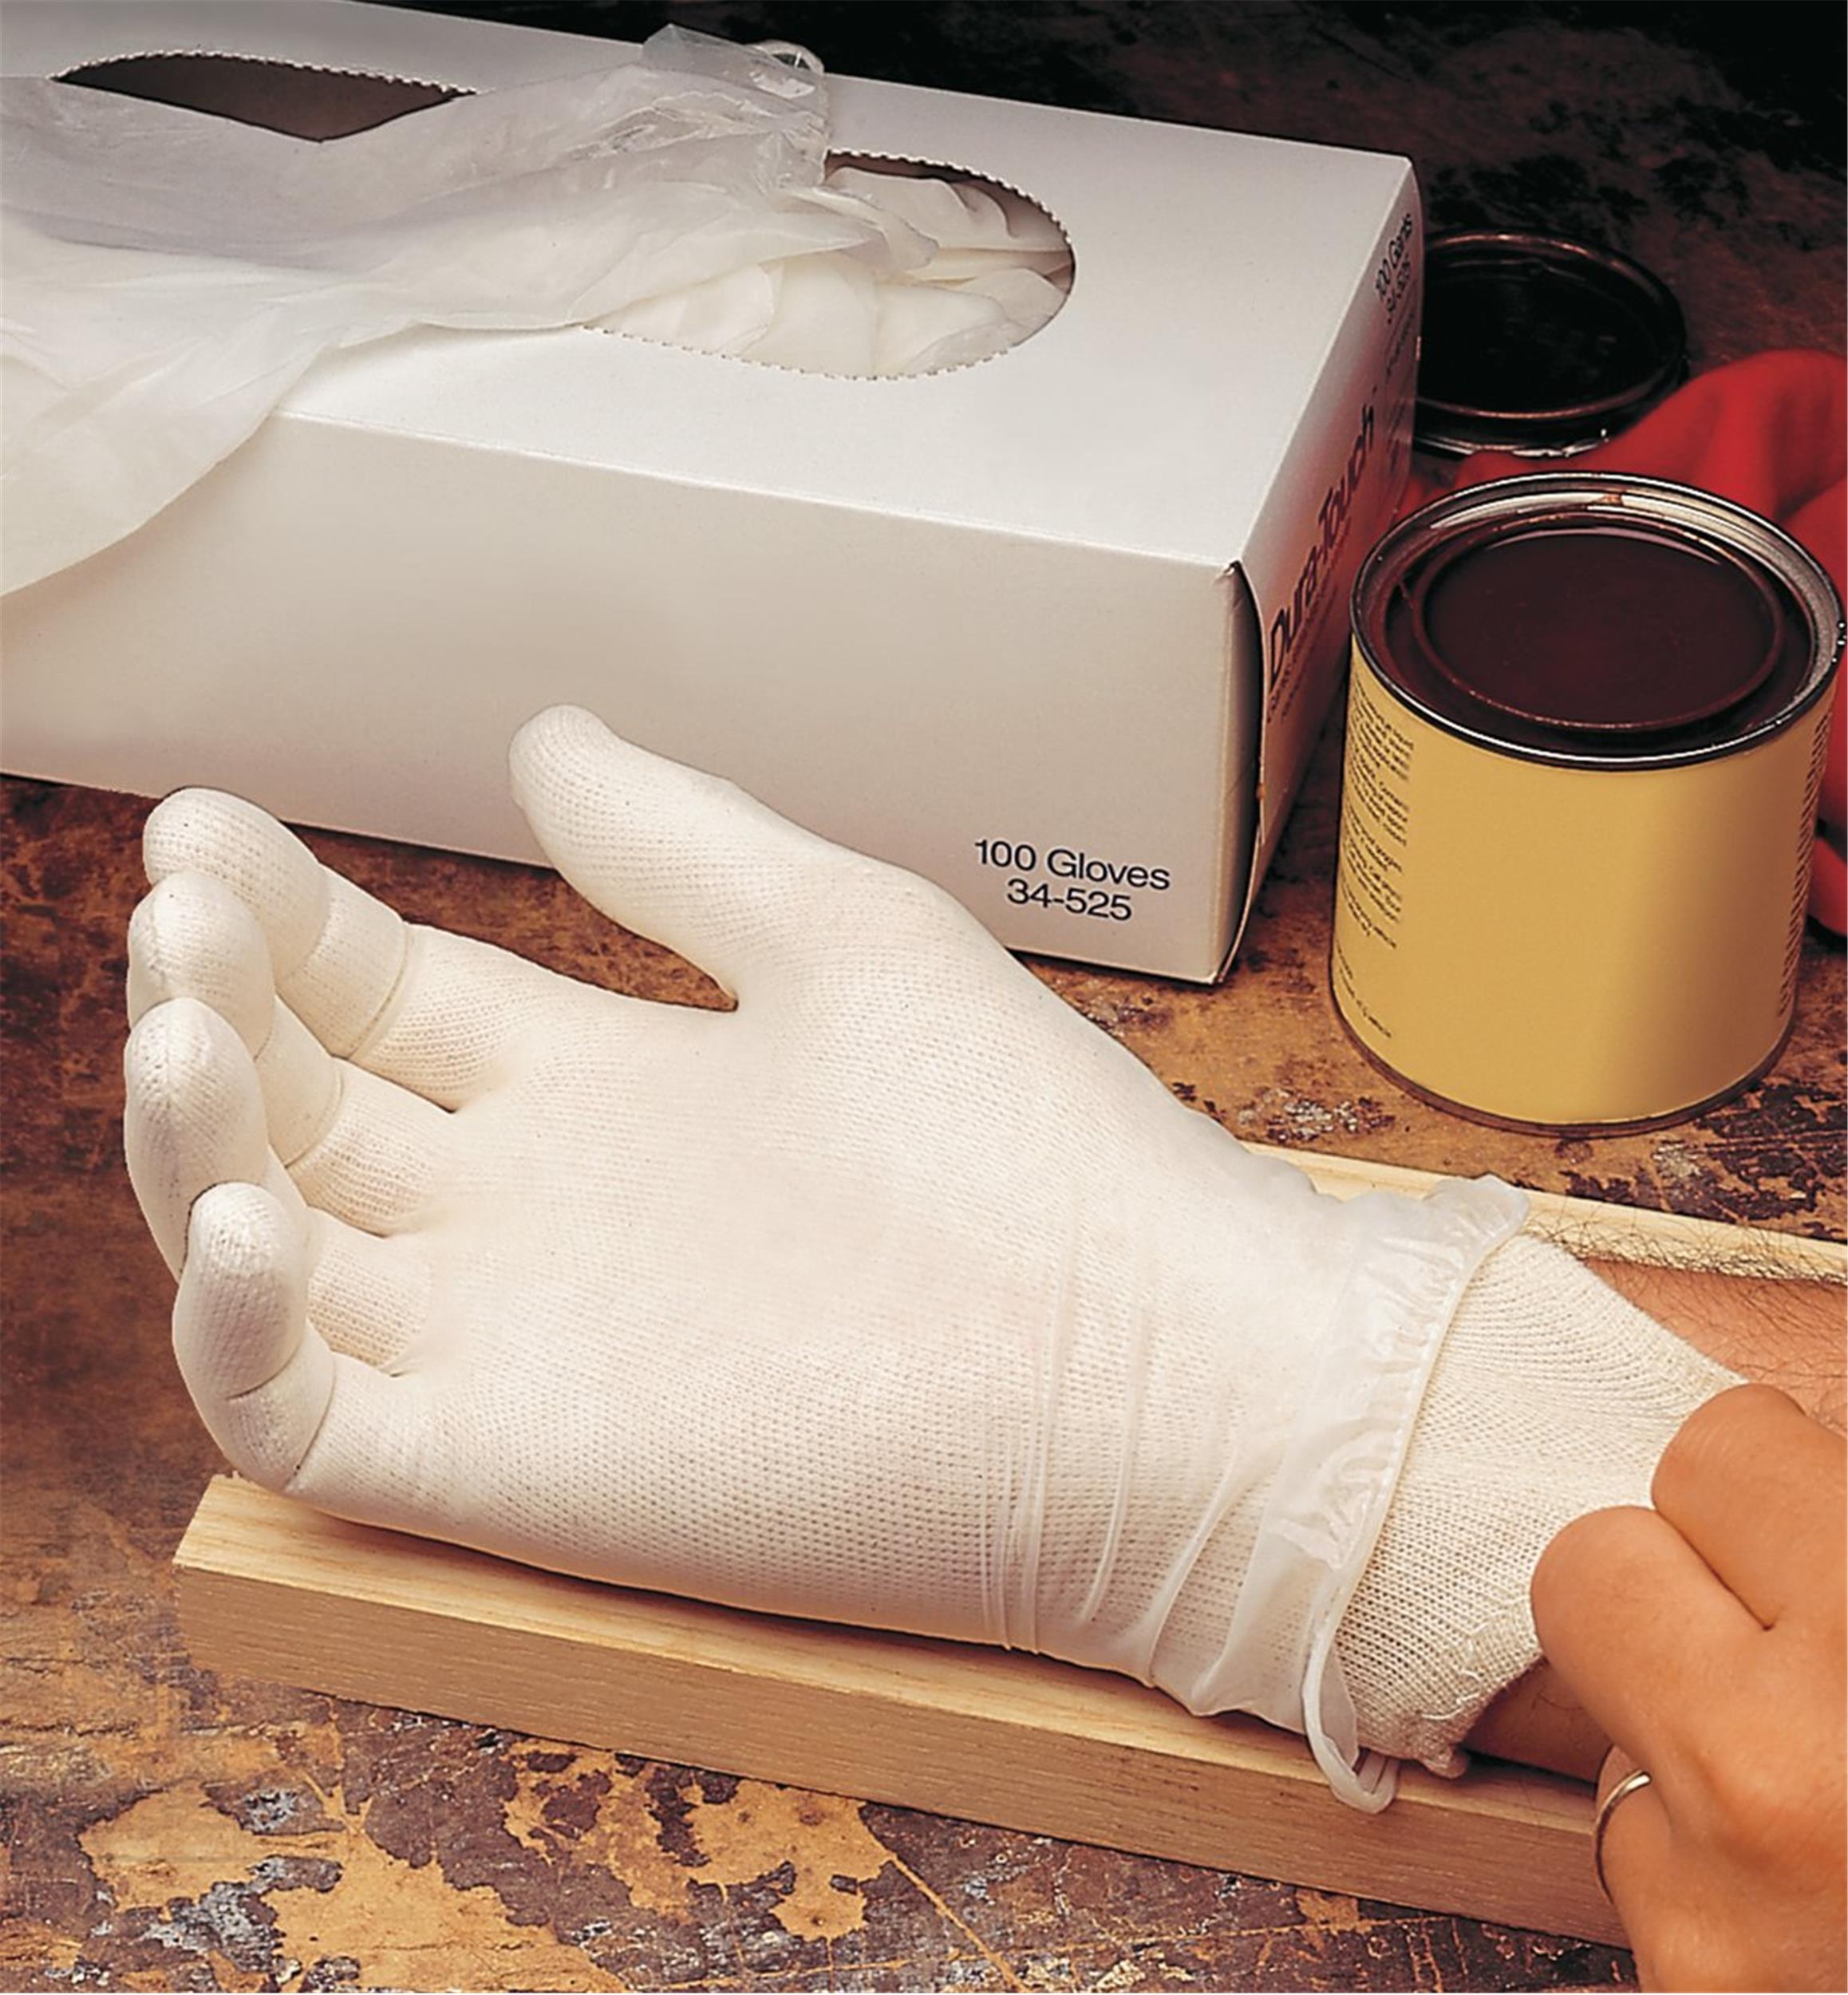 Cotton Glove Liners - Lee Valley Tools